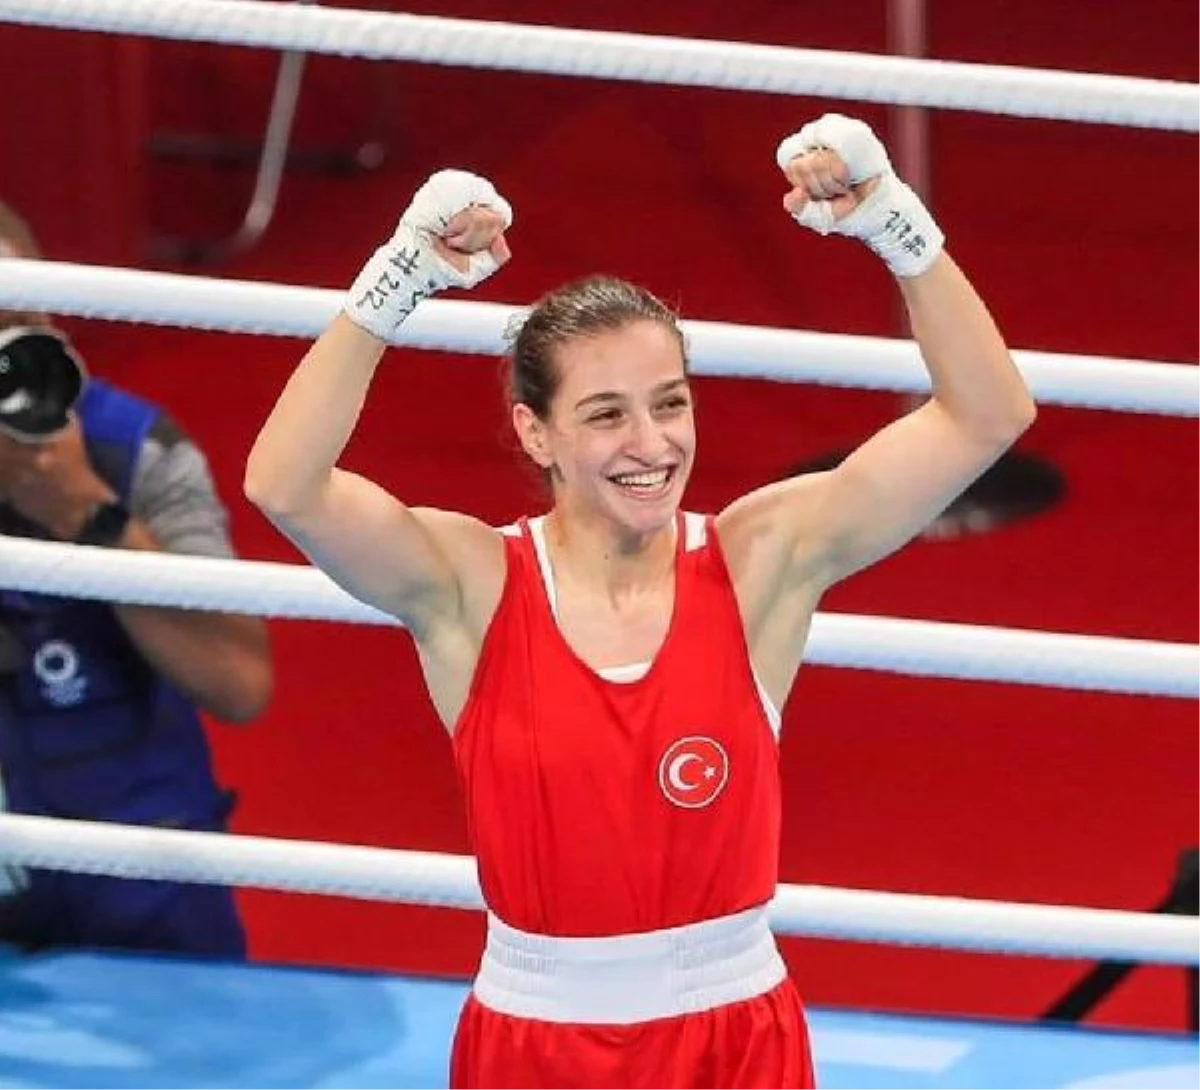 Mother of silver medalist Olympian Buse Naz: She trained 6 hours a day